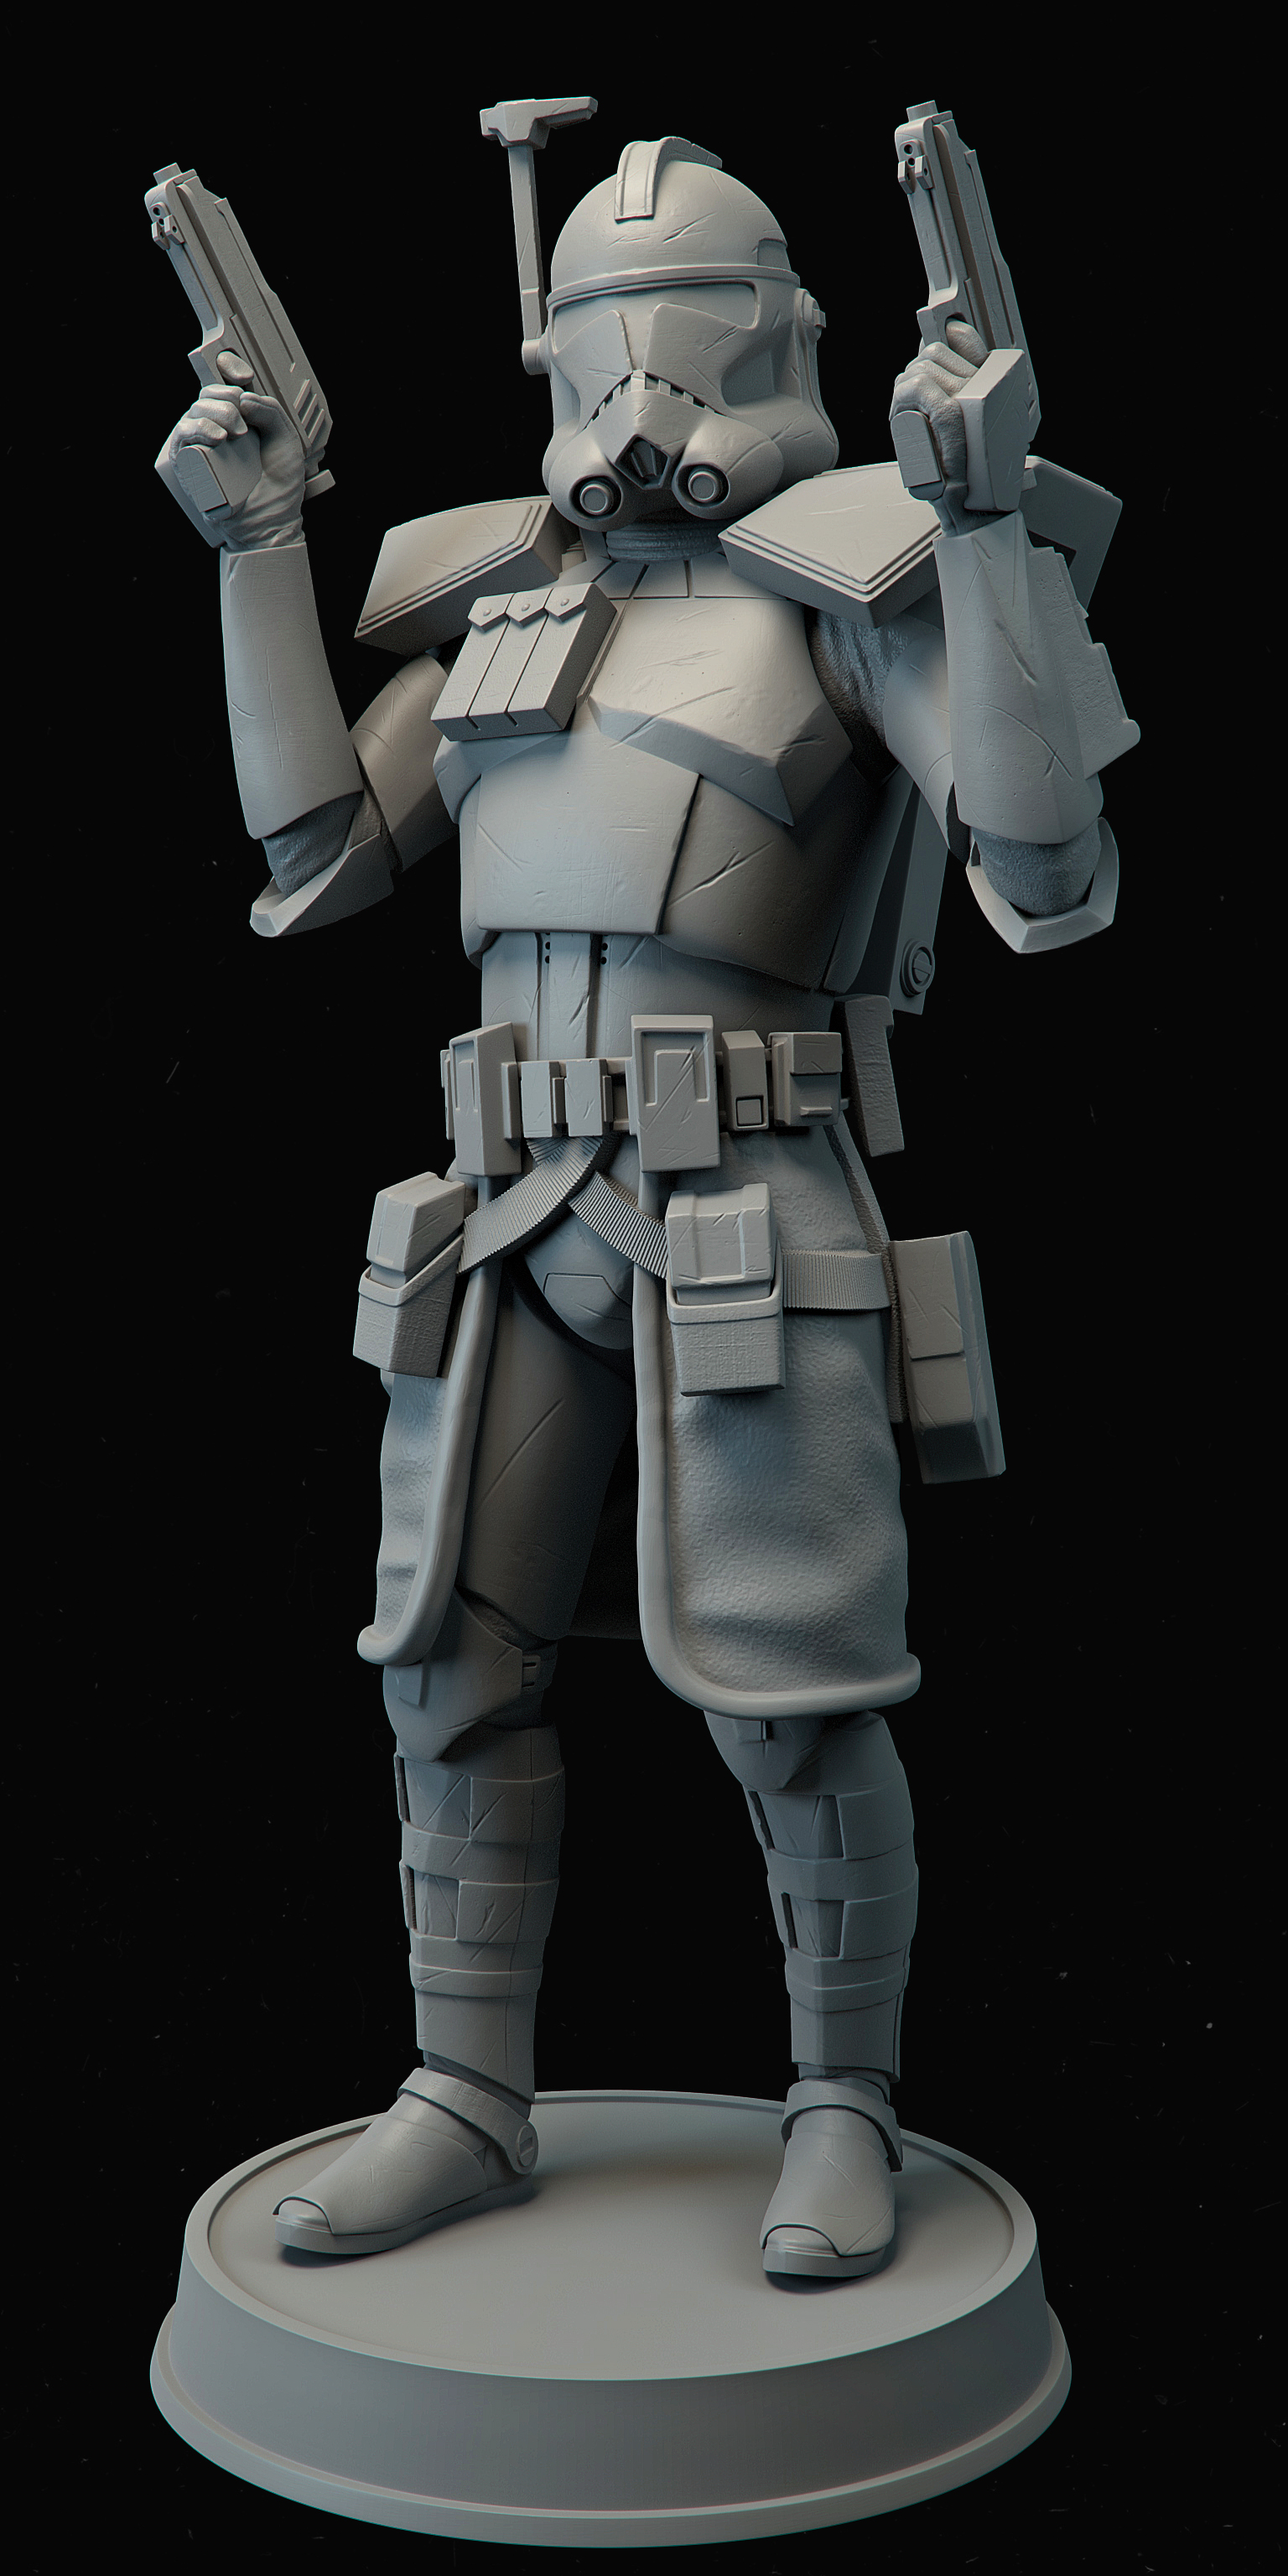 clone-trooper-figurines-pose-3d-print-files-galactic-armory